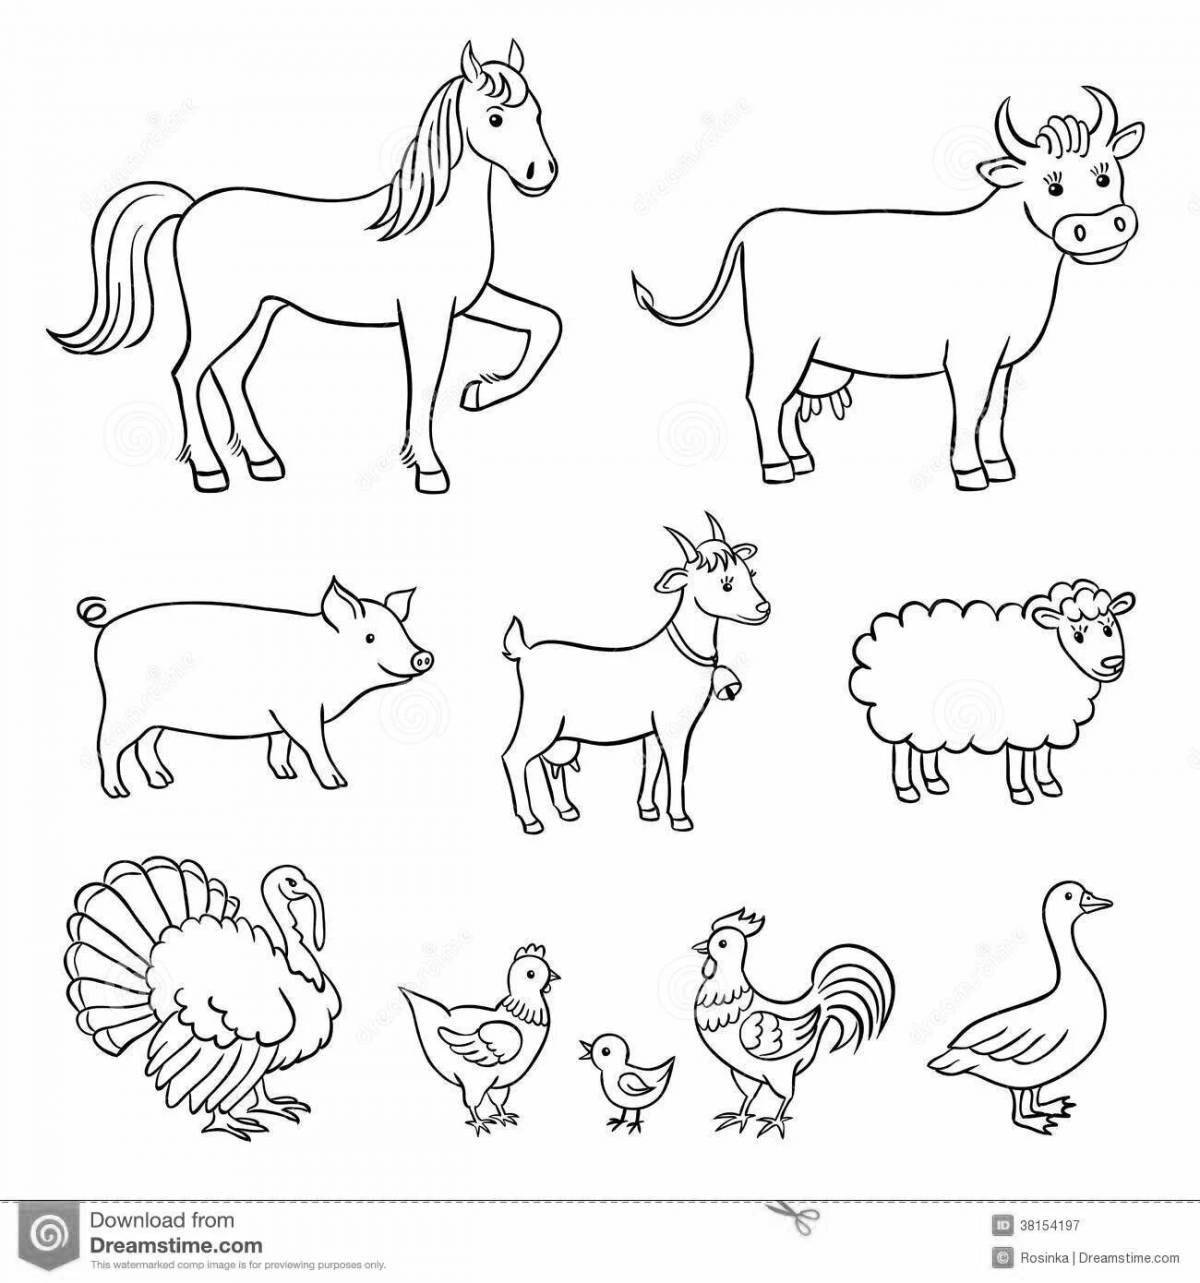 Beware of pets coloring pages